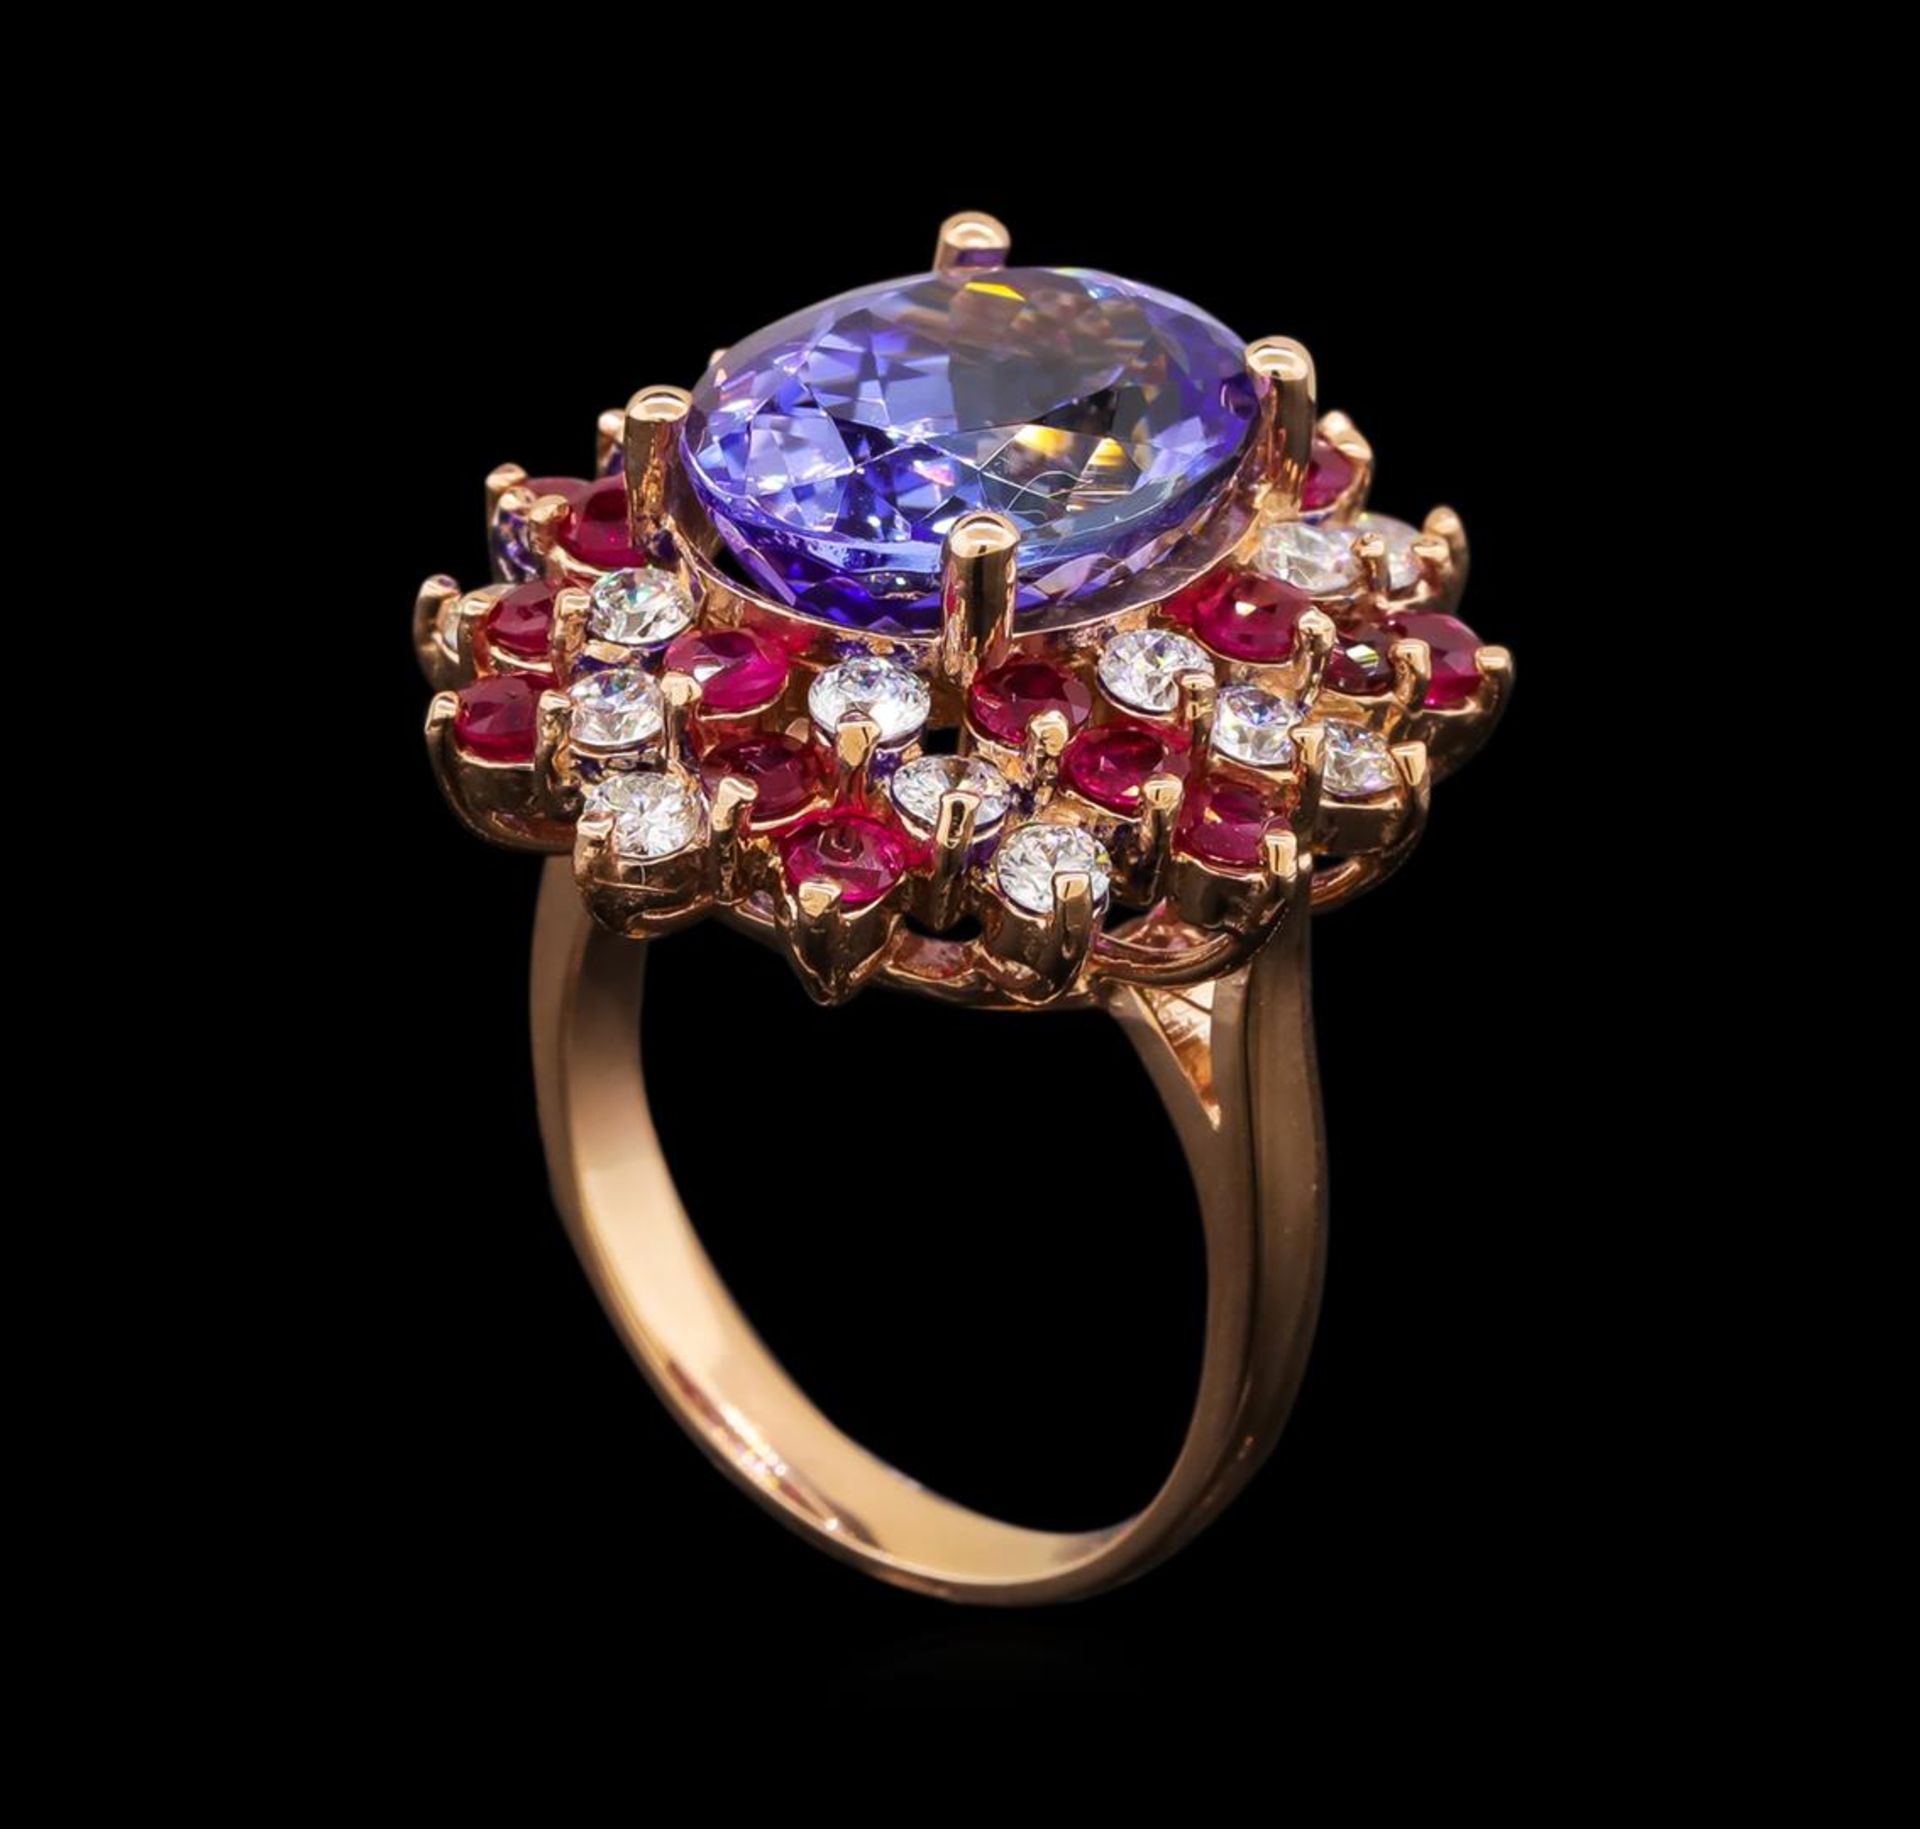 14KT Rose Gold 7.95 ctw Tanzanite, Ruby and Diamond Ring - Image 4 of 5